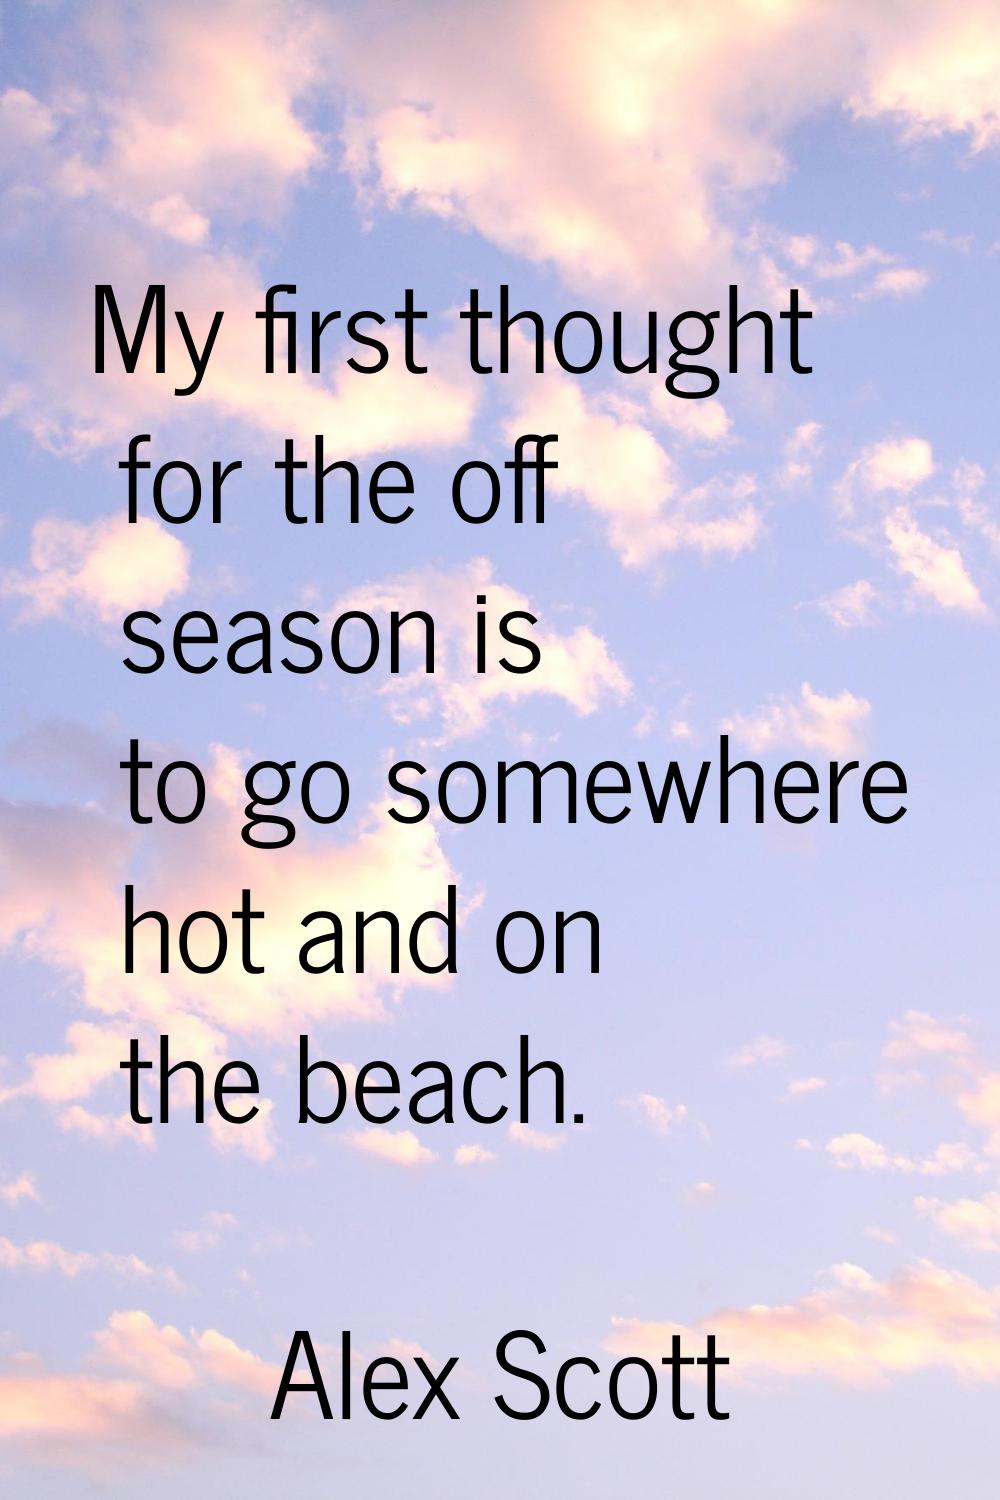 My first thought for the off season is to go somewhere hot and on the beach.